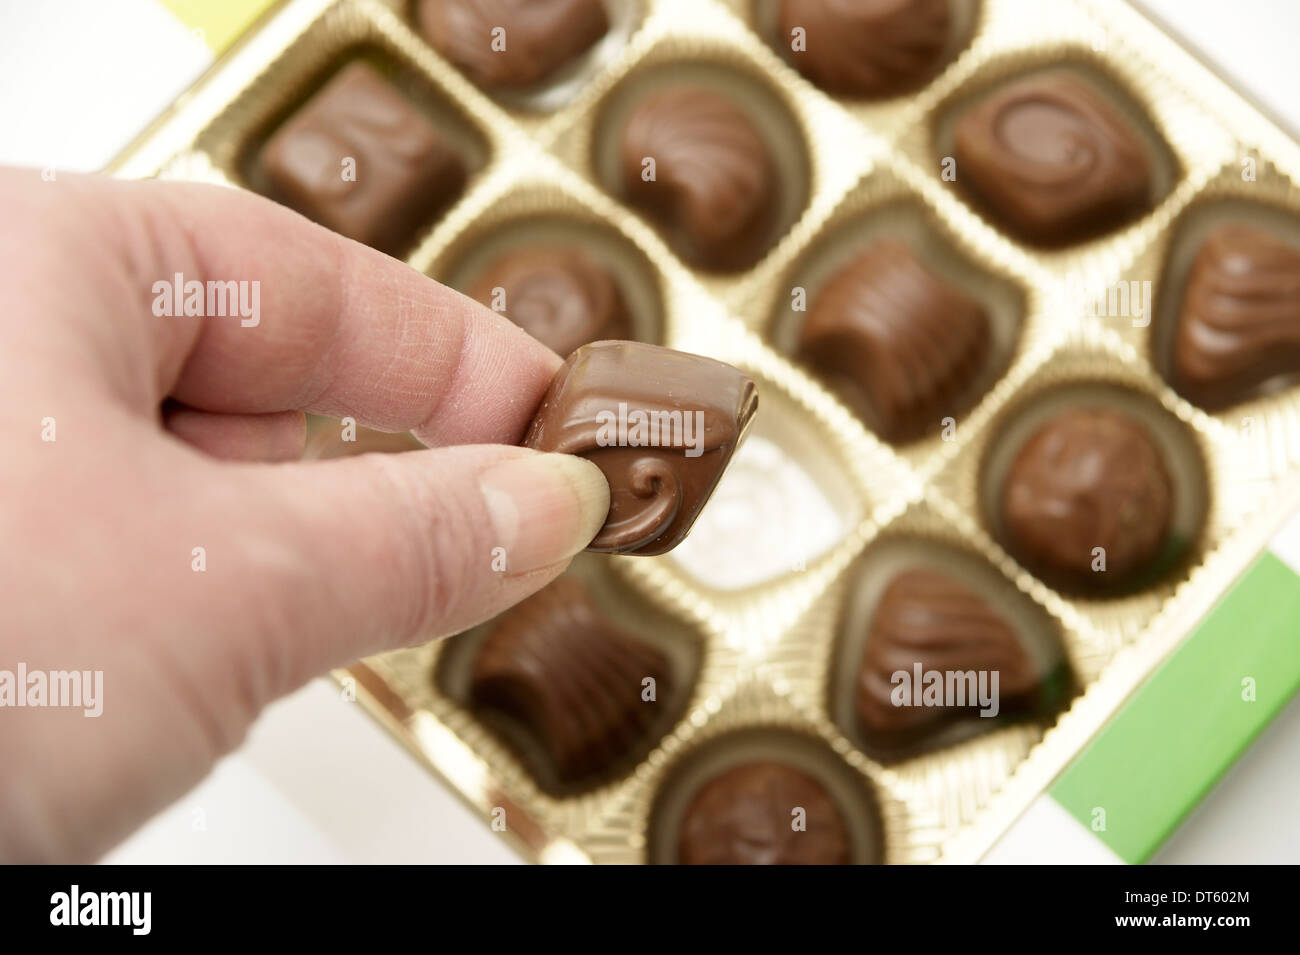 Woman helping herself to a chocolate from a box of chocolates Stock Photo